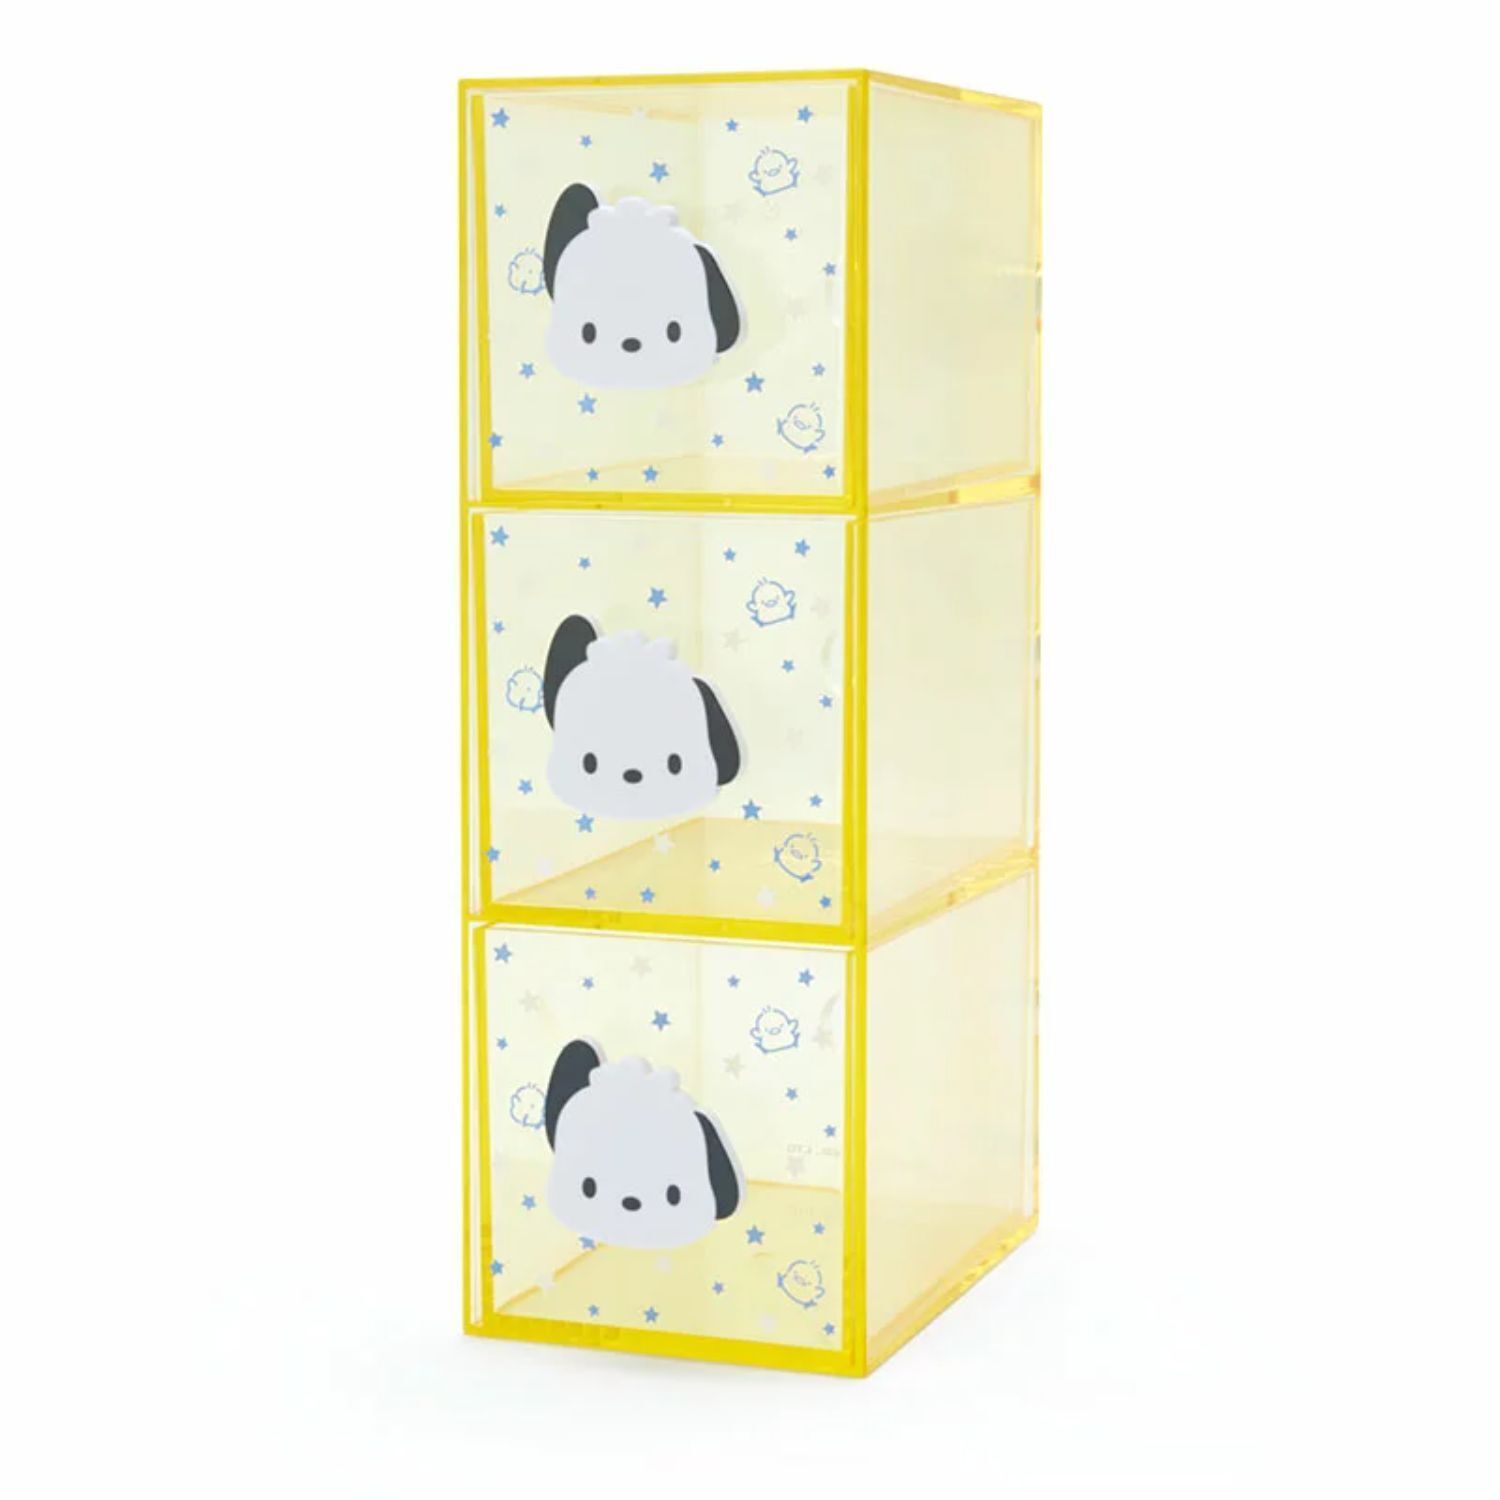 Sanrio Characters Pochacco Collection Accessory Case Storage Box New Japan